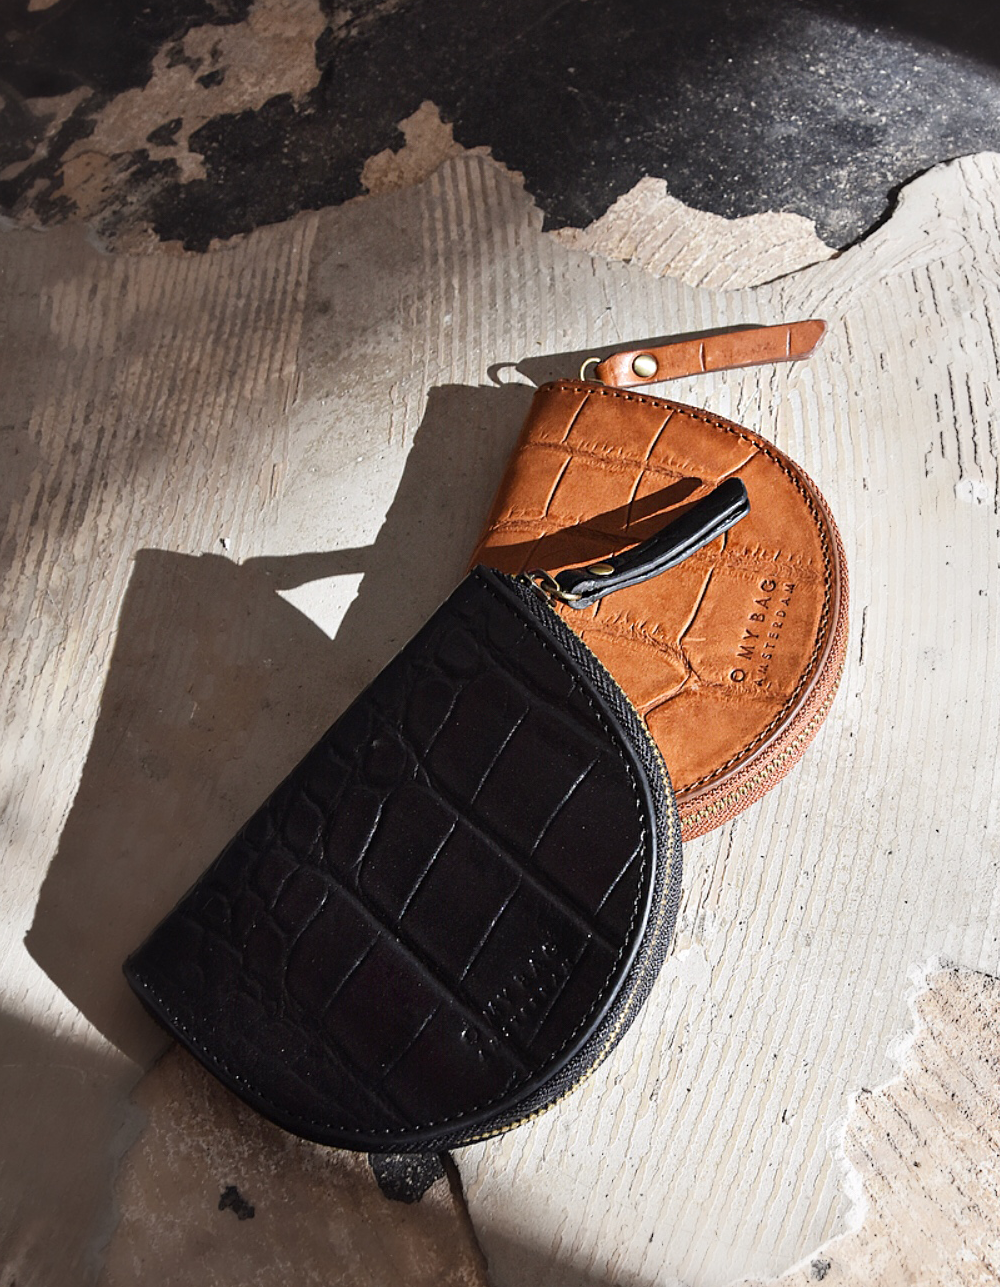 Laura Purse Black Classic Croco Leather. Round mood shape coin purse unisex wallet. Lifestyle image.